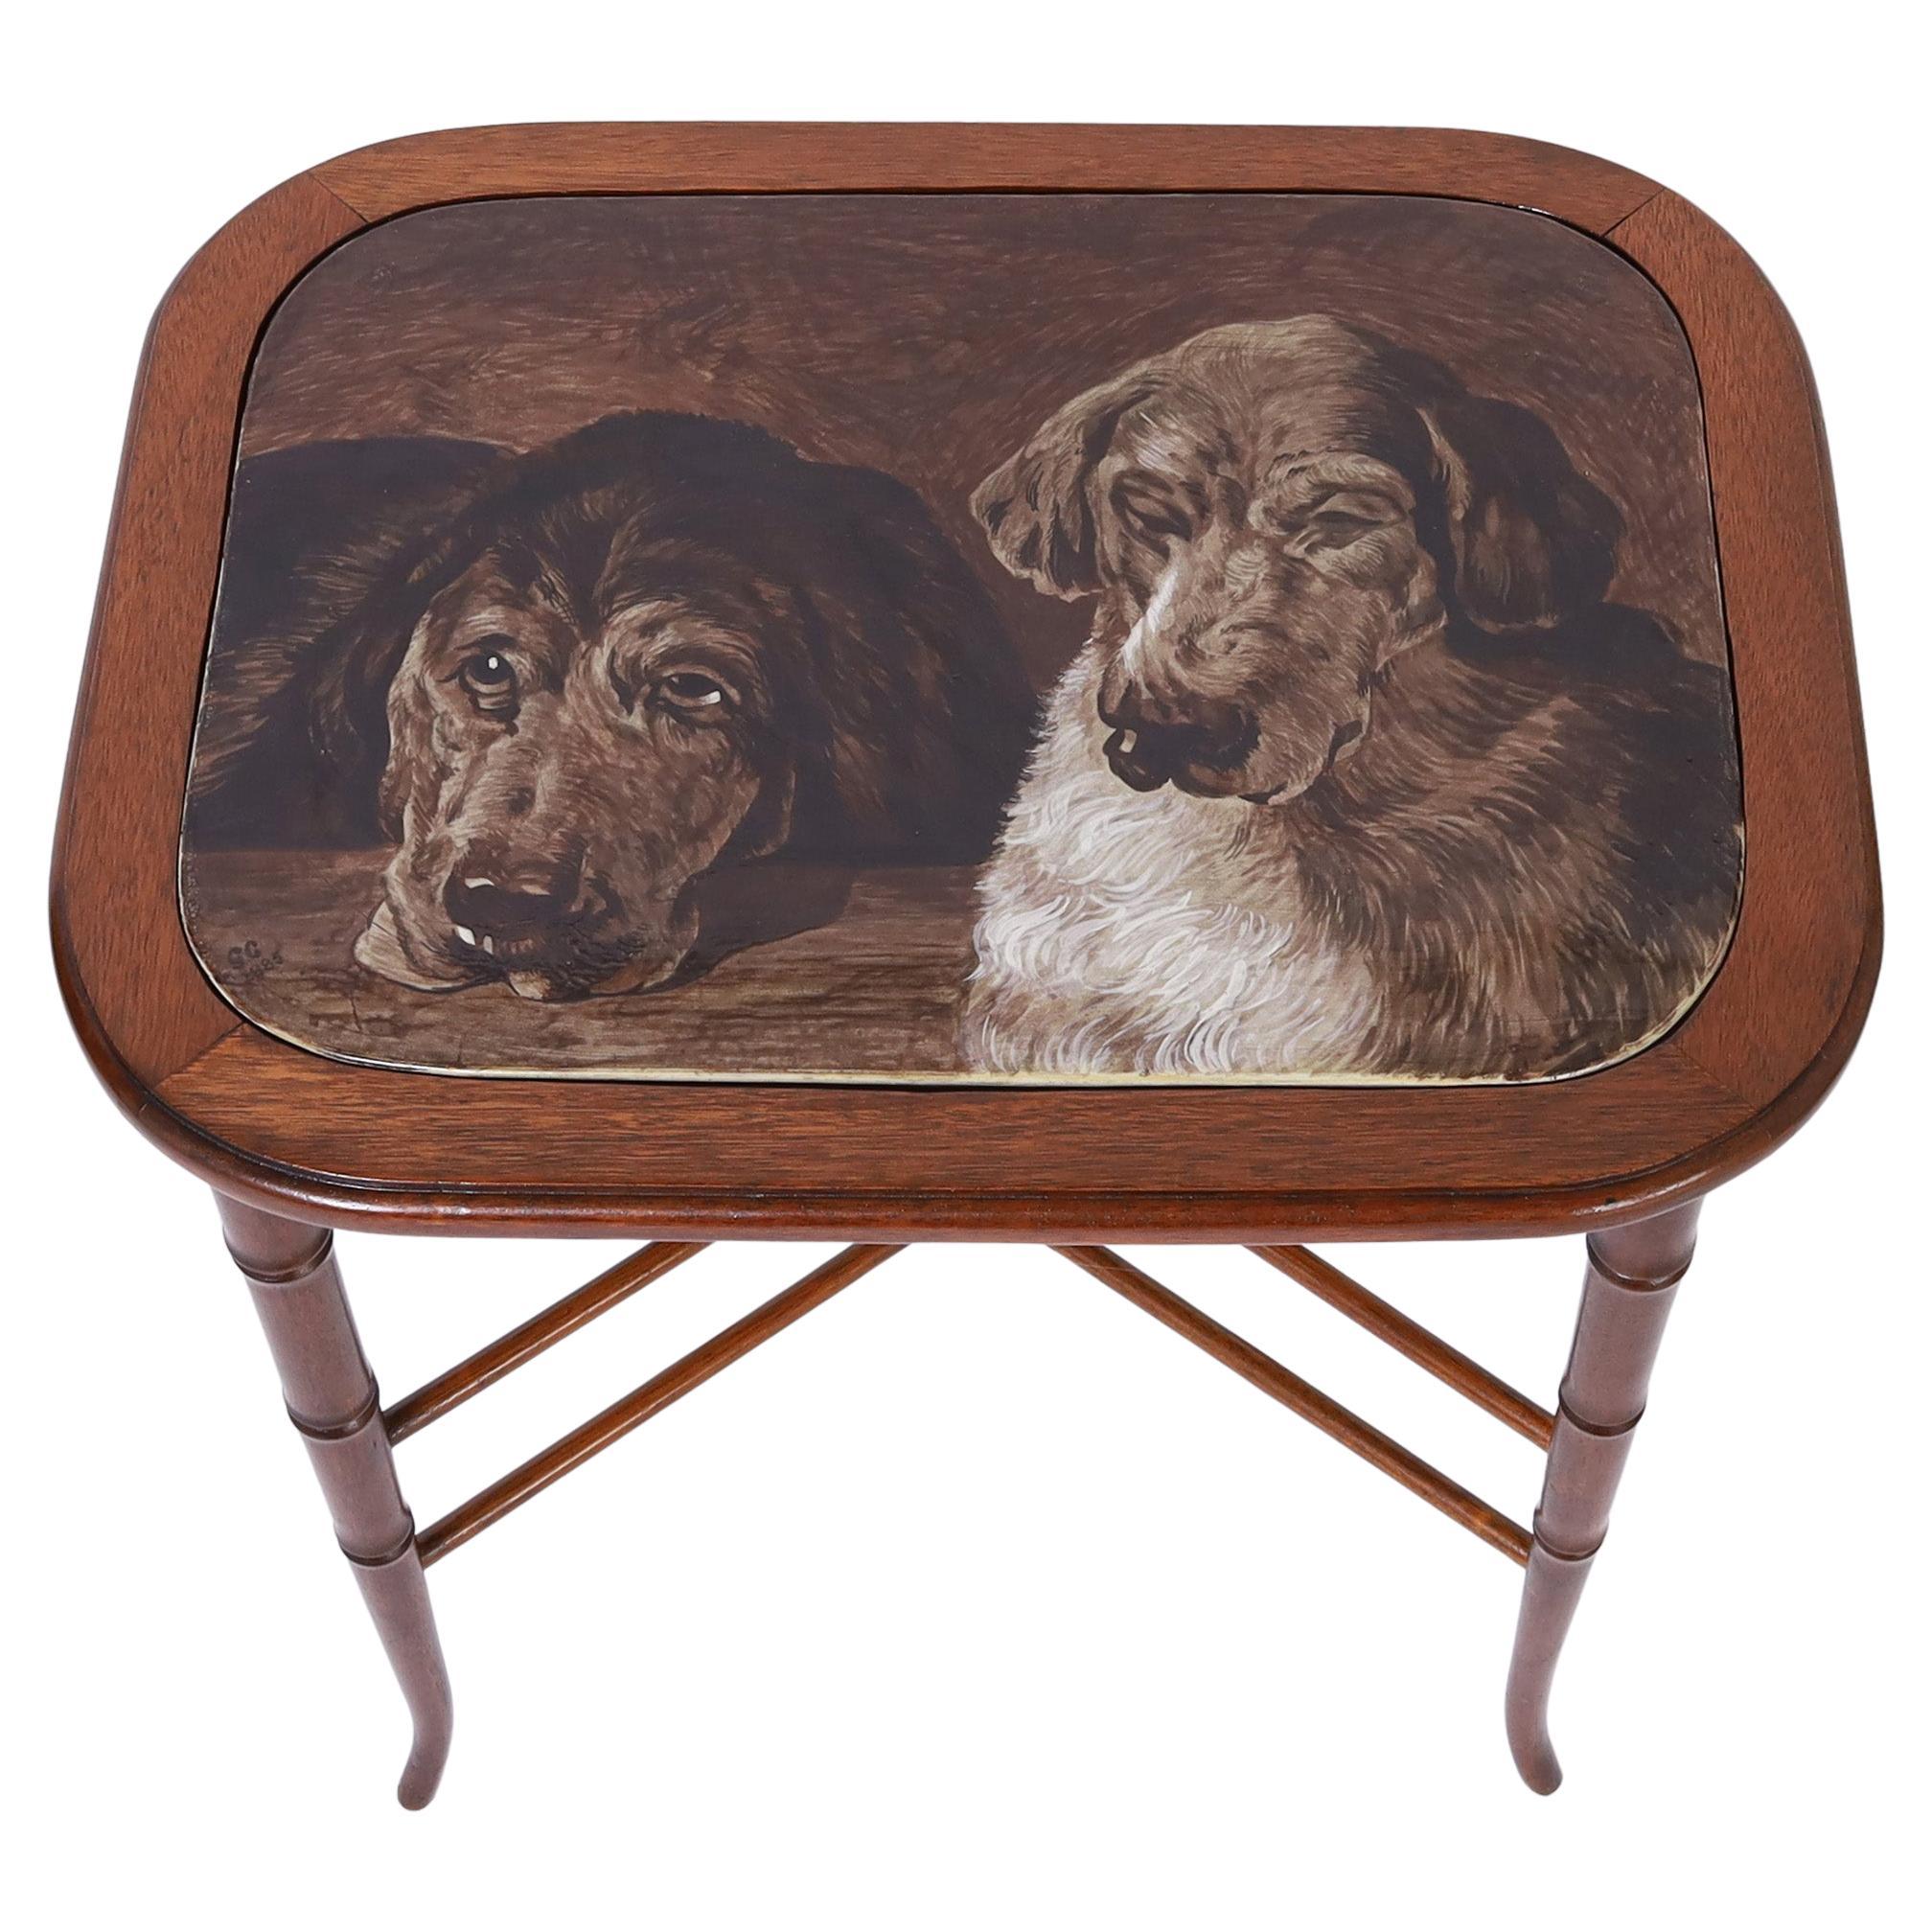 Antique English Tile Top Table with Dogs on a Faux Bamboo Base For Sale